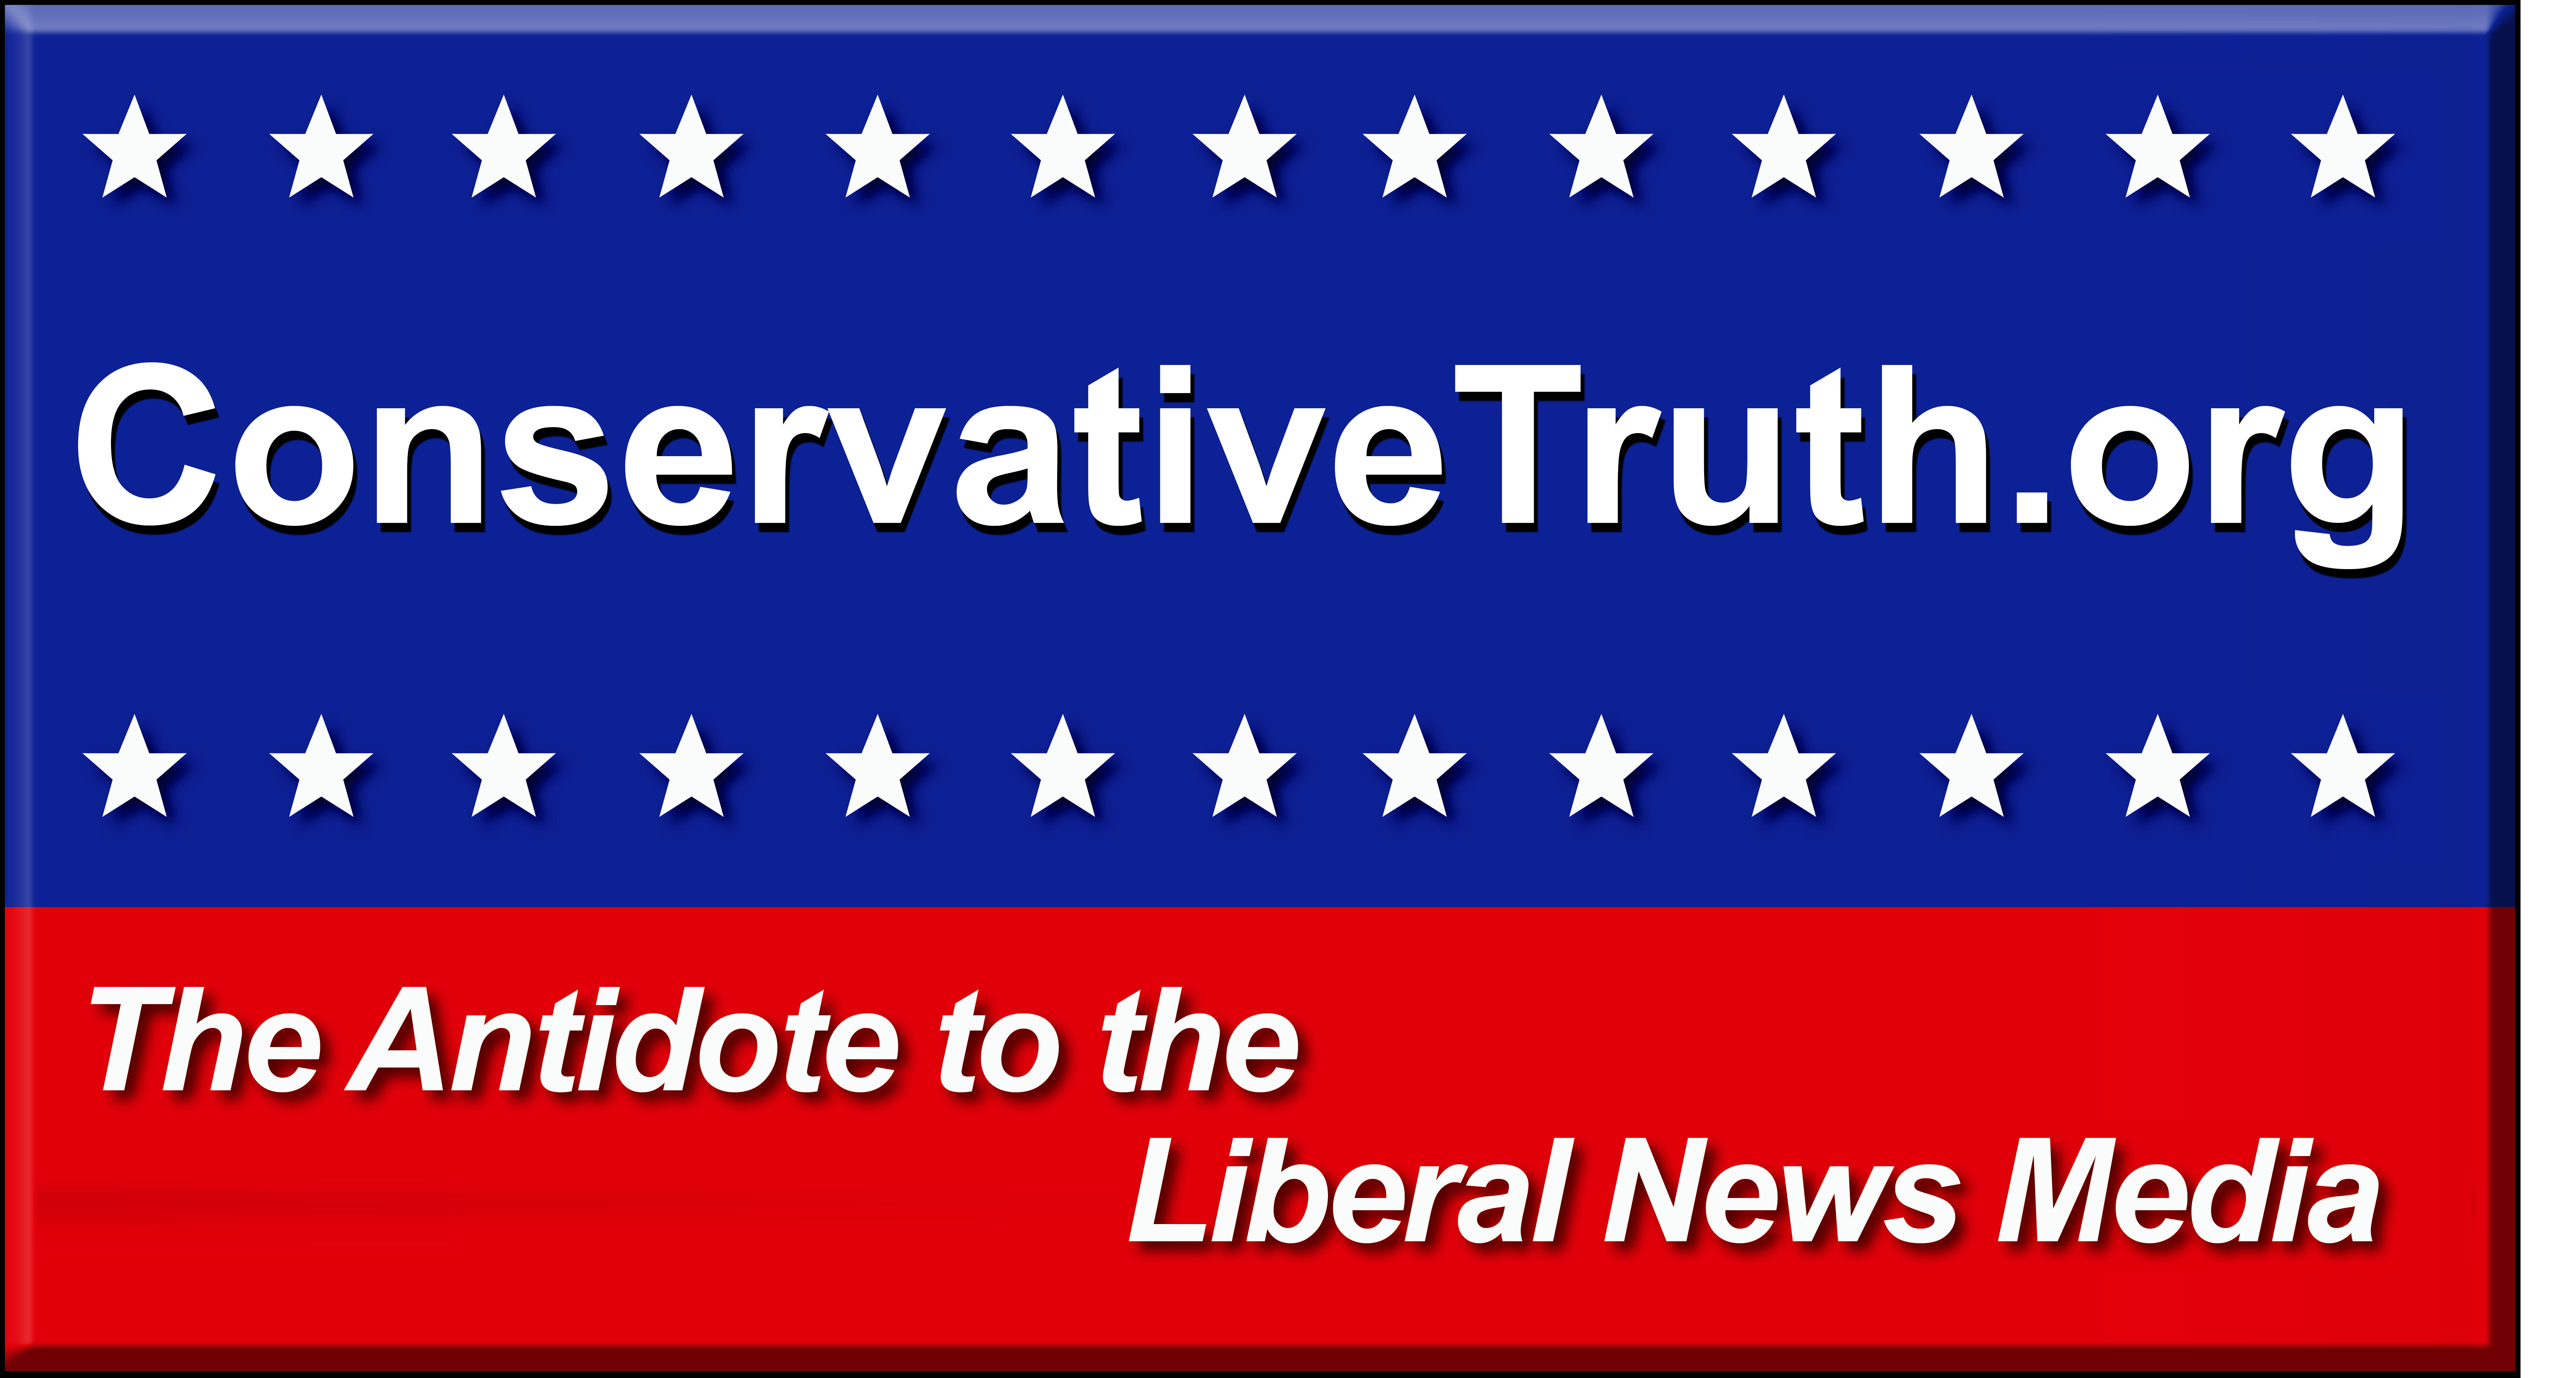 www.conservativetruth.org